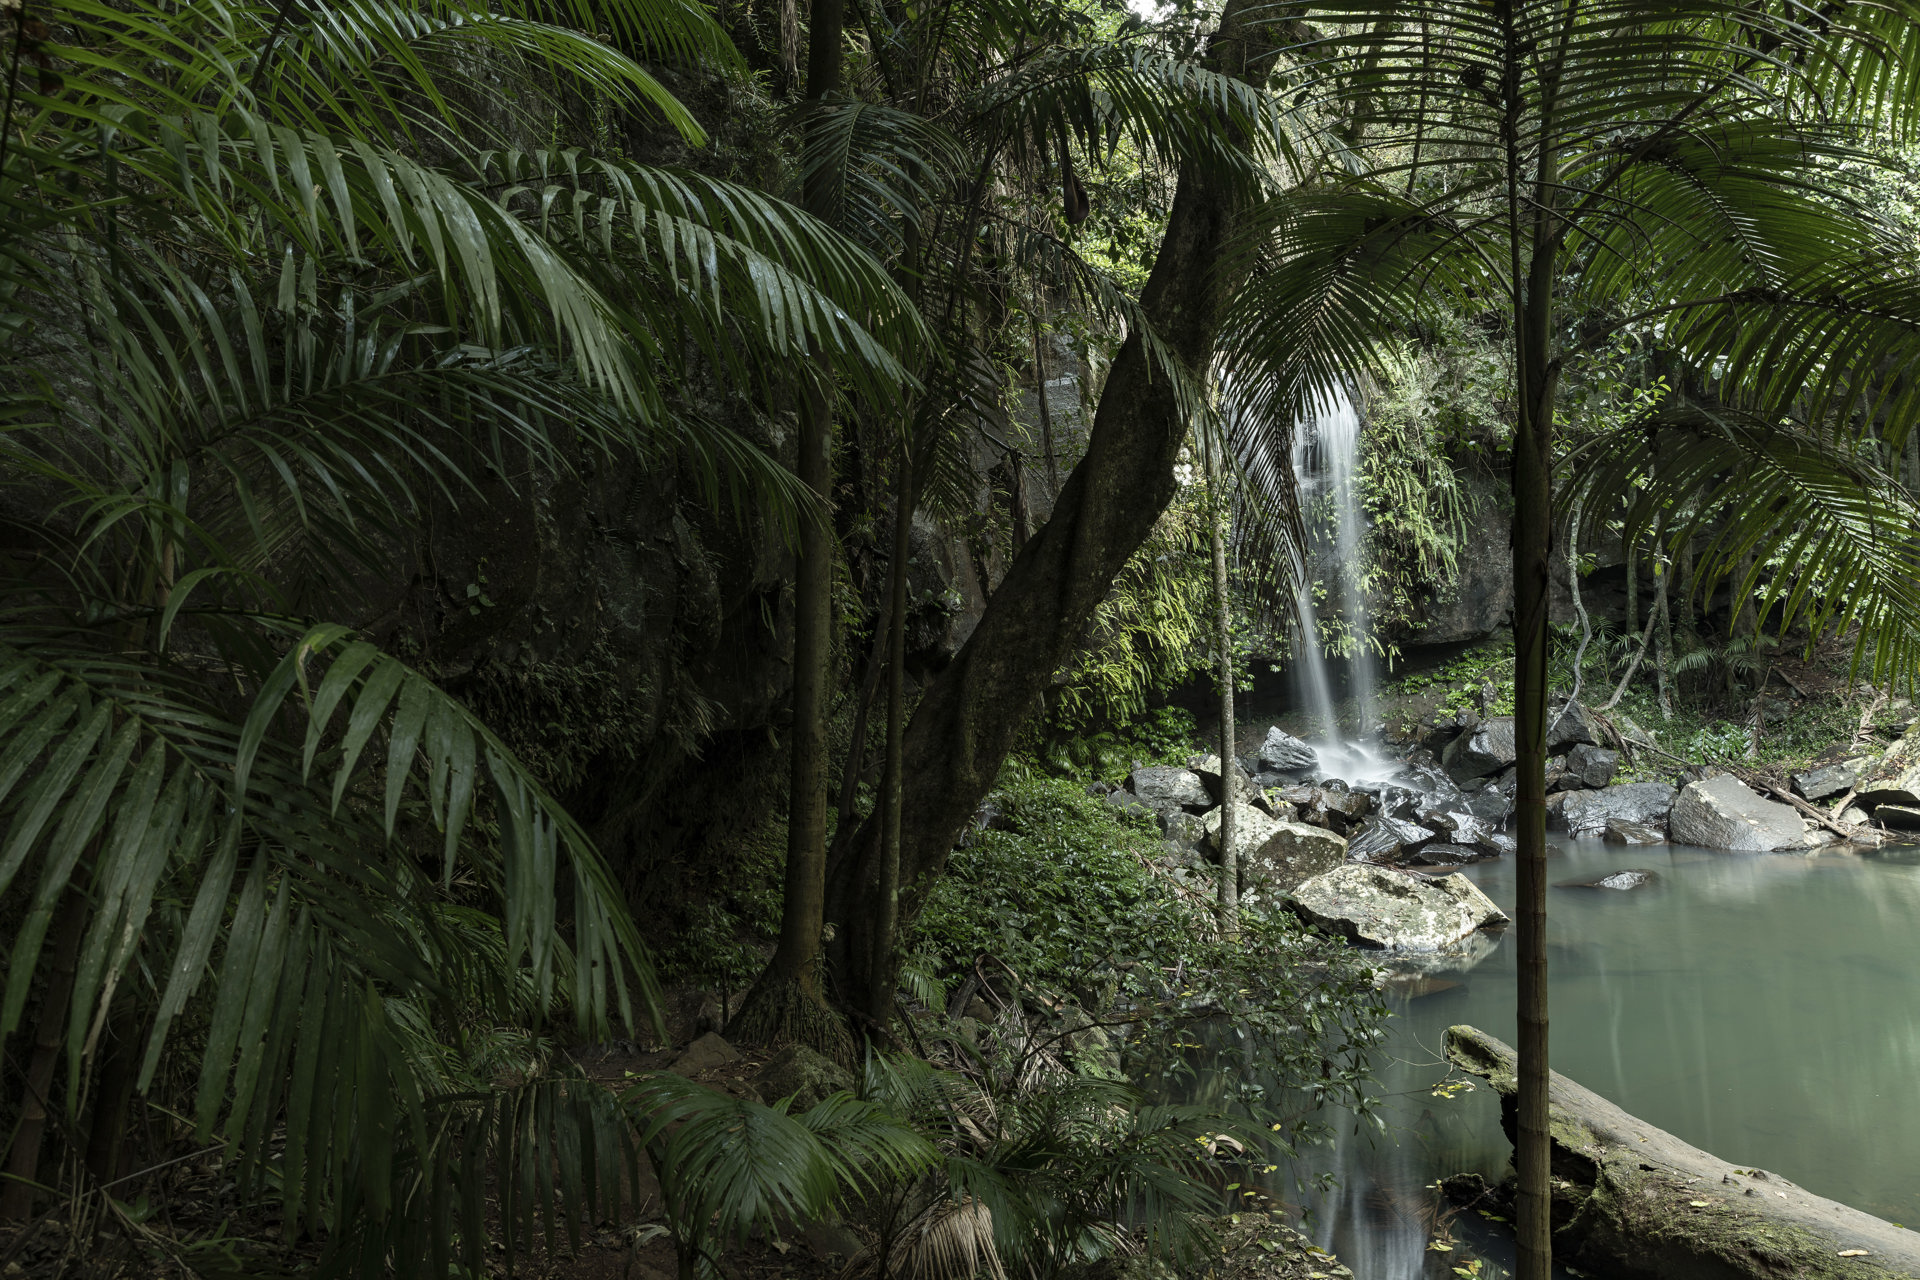 A faraway image of the Buderim falls waterfall with water flowing over the edge, with tropical palms in the foreground.